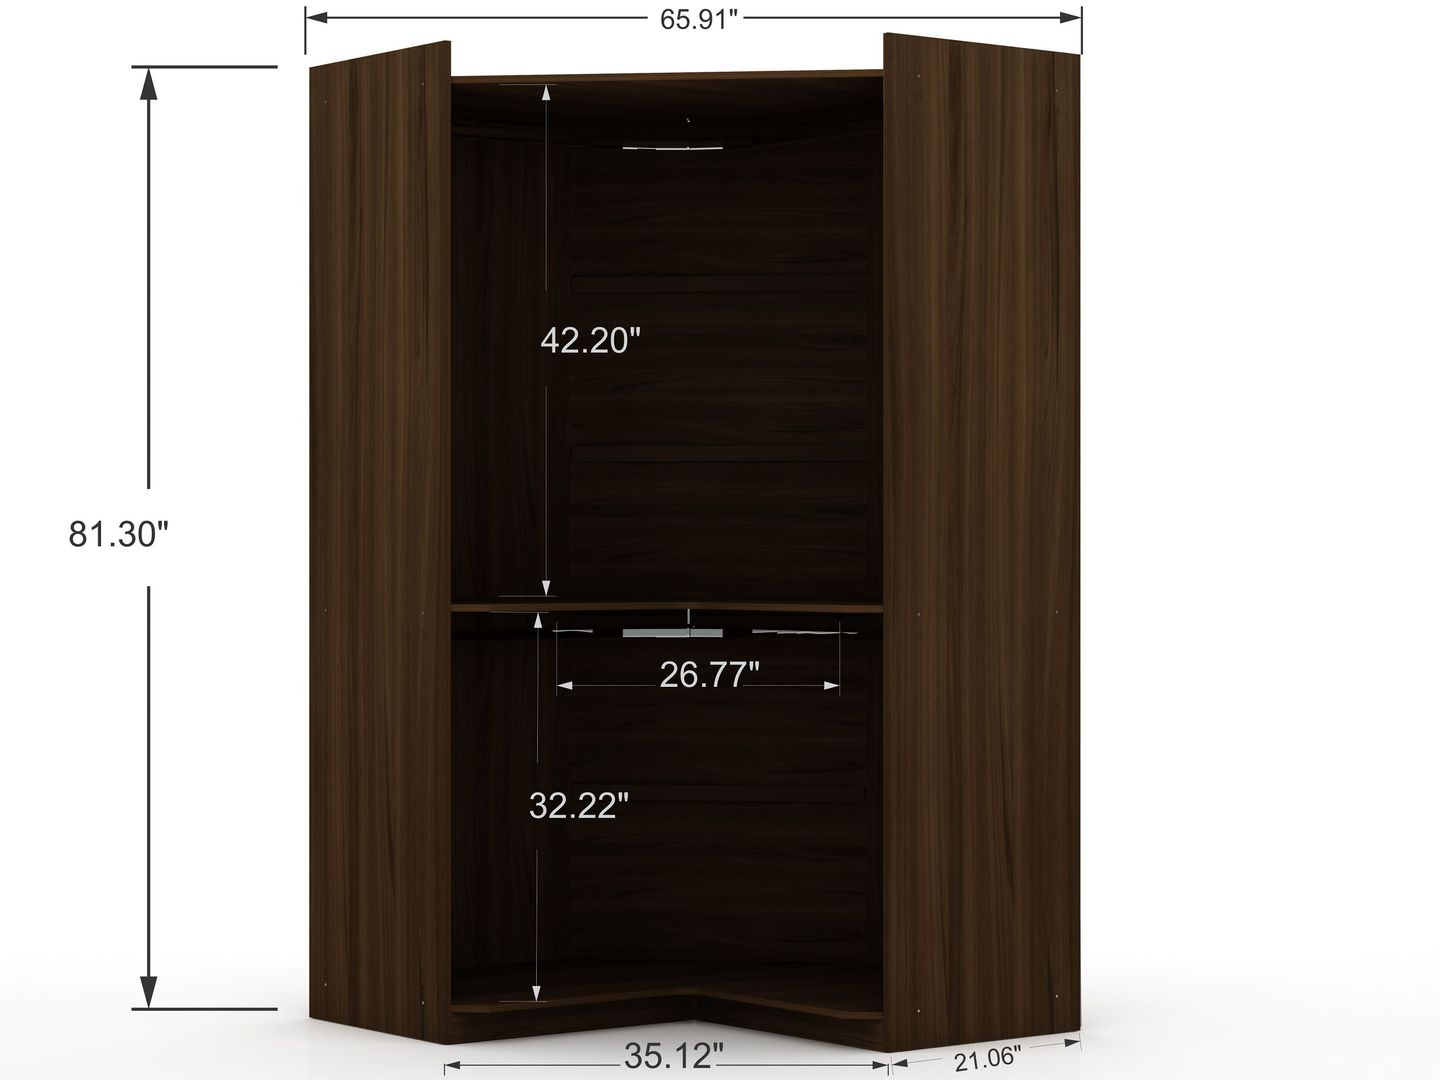 Manhattan Comfort Mulberry Open 2 Sectional Modern Corner Wardrobe Closet with 2 Drawers- Set of 2 in Brown